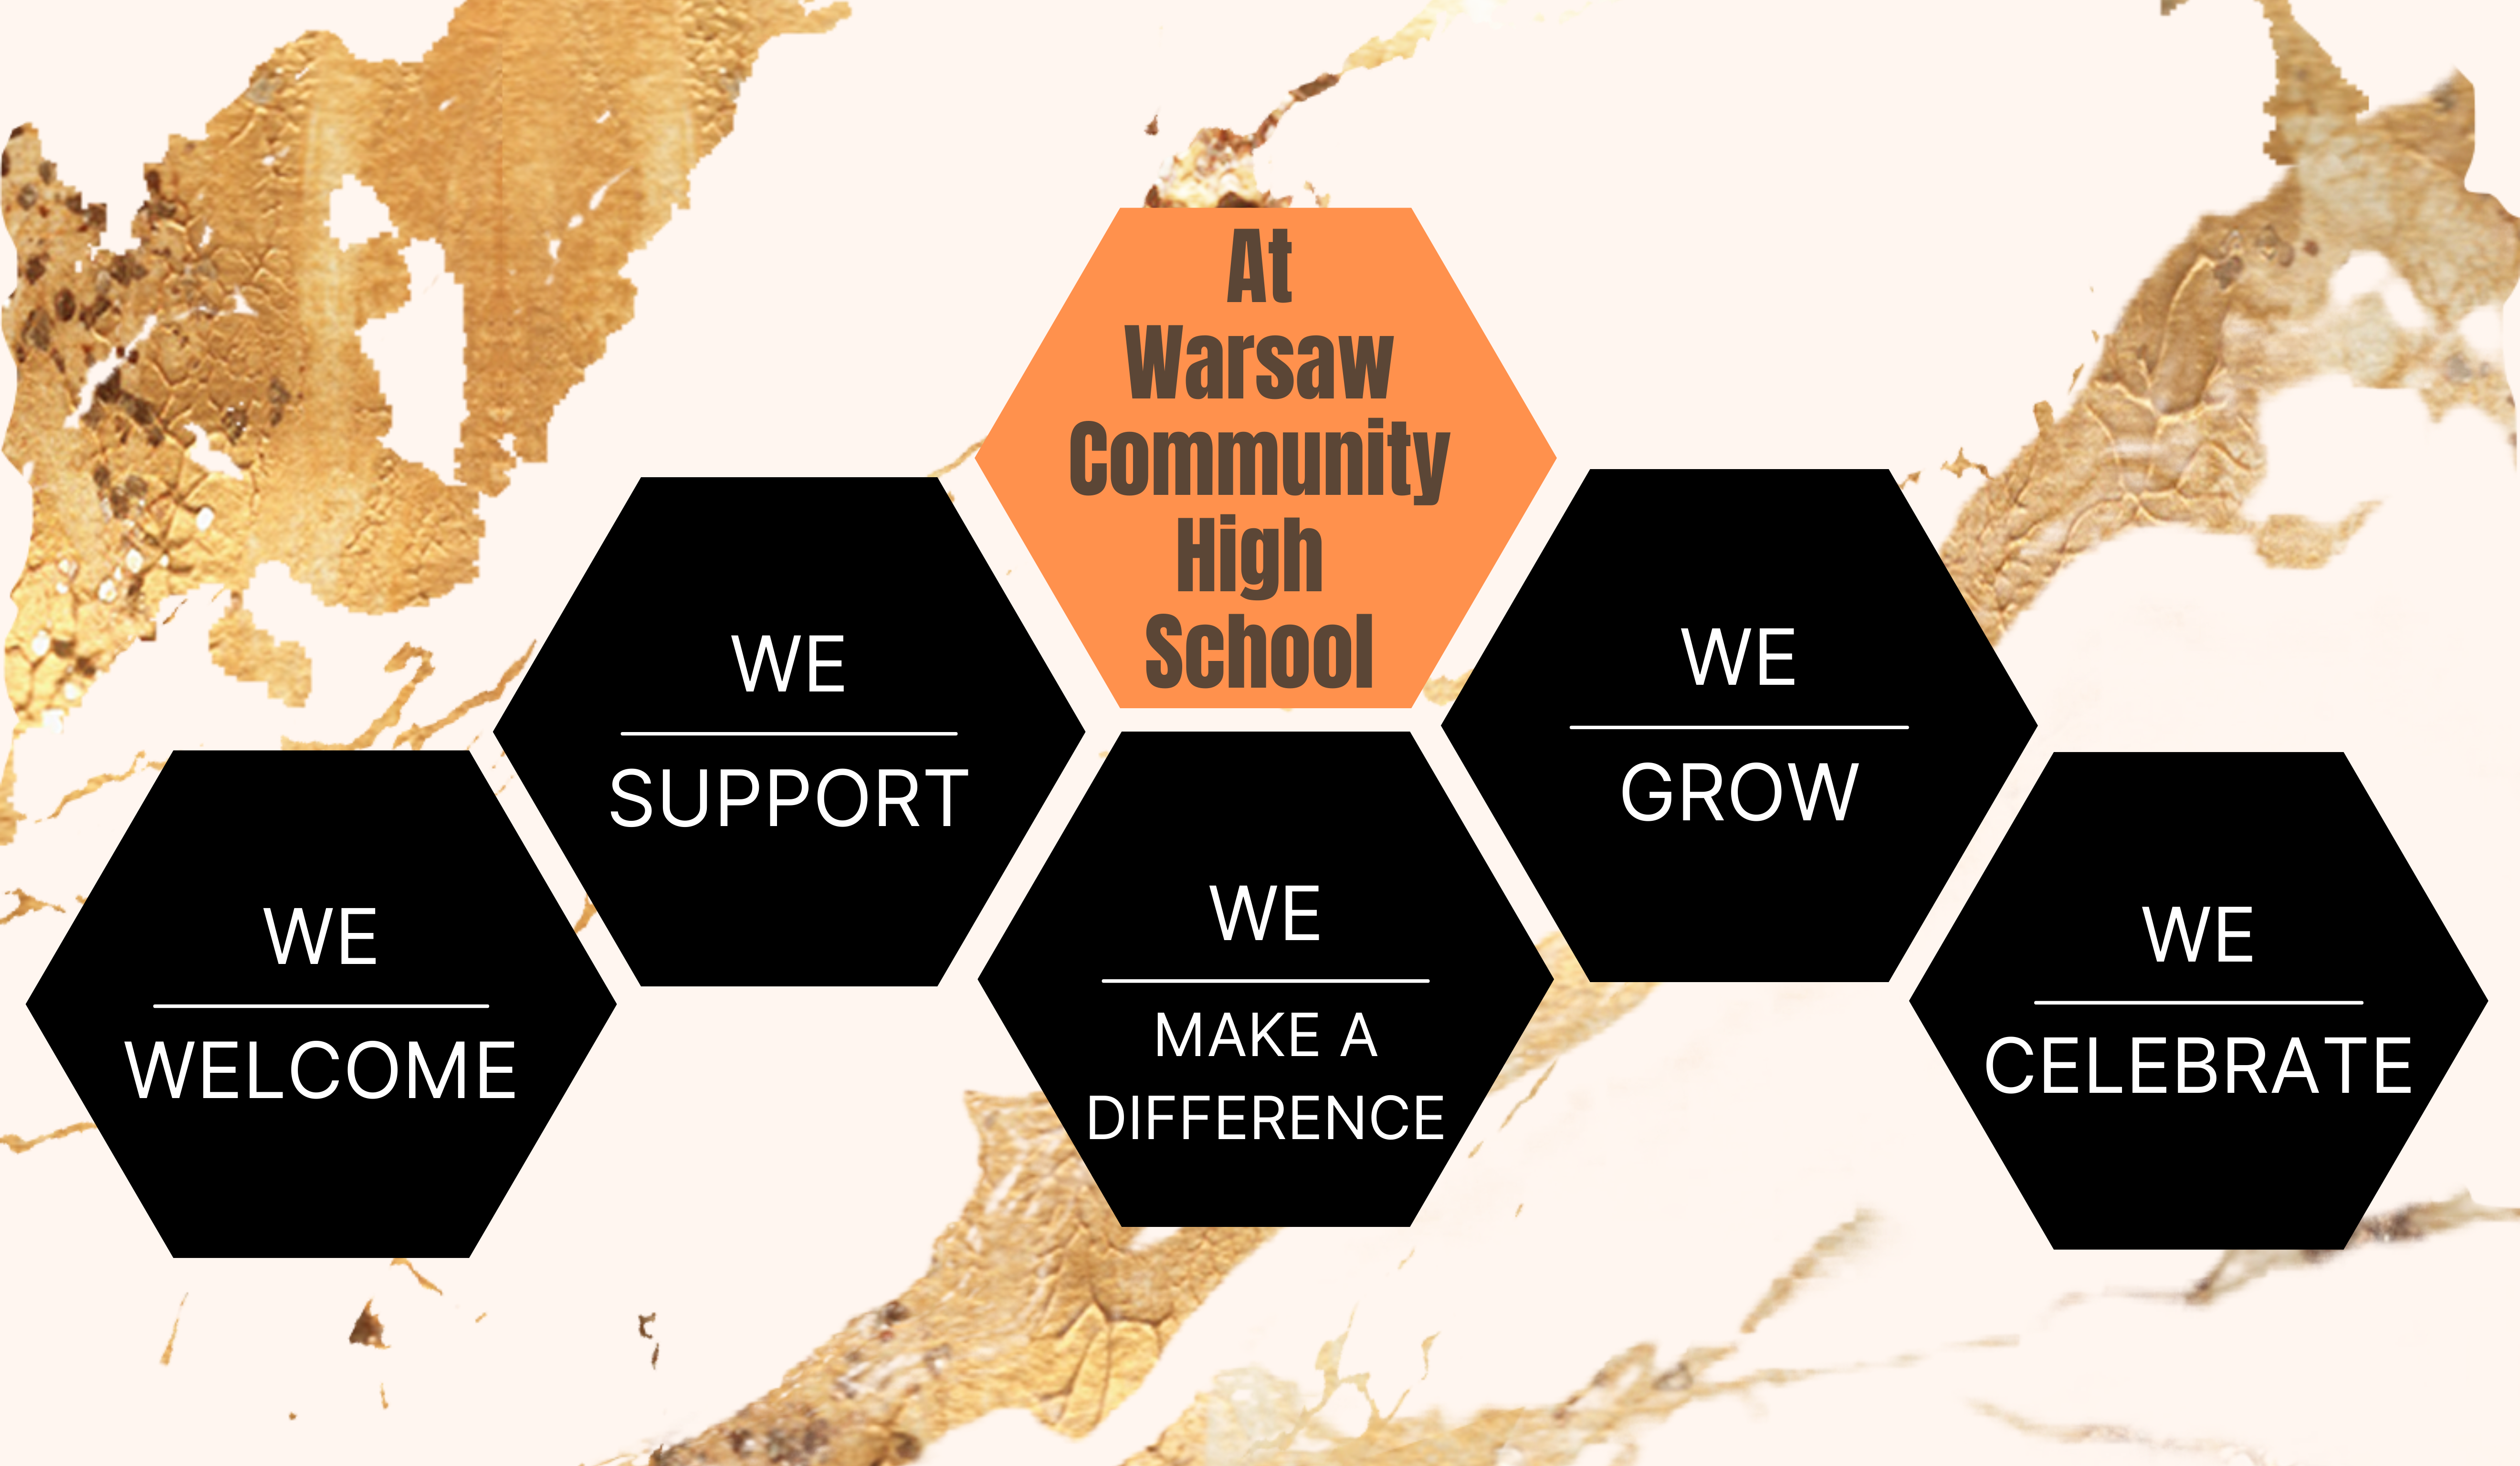 at warsaw community high school we welcome, we support, we make a difference, we grow, we celebrate. Black and orange honeycomb pattern on a gold foil background